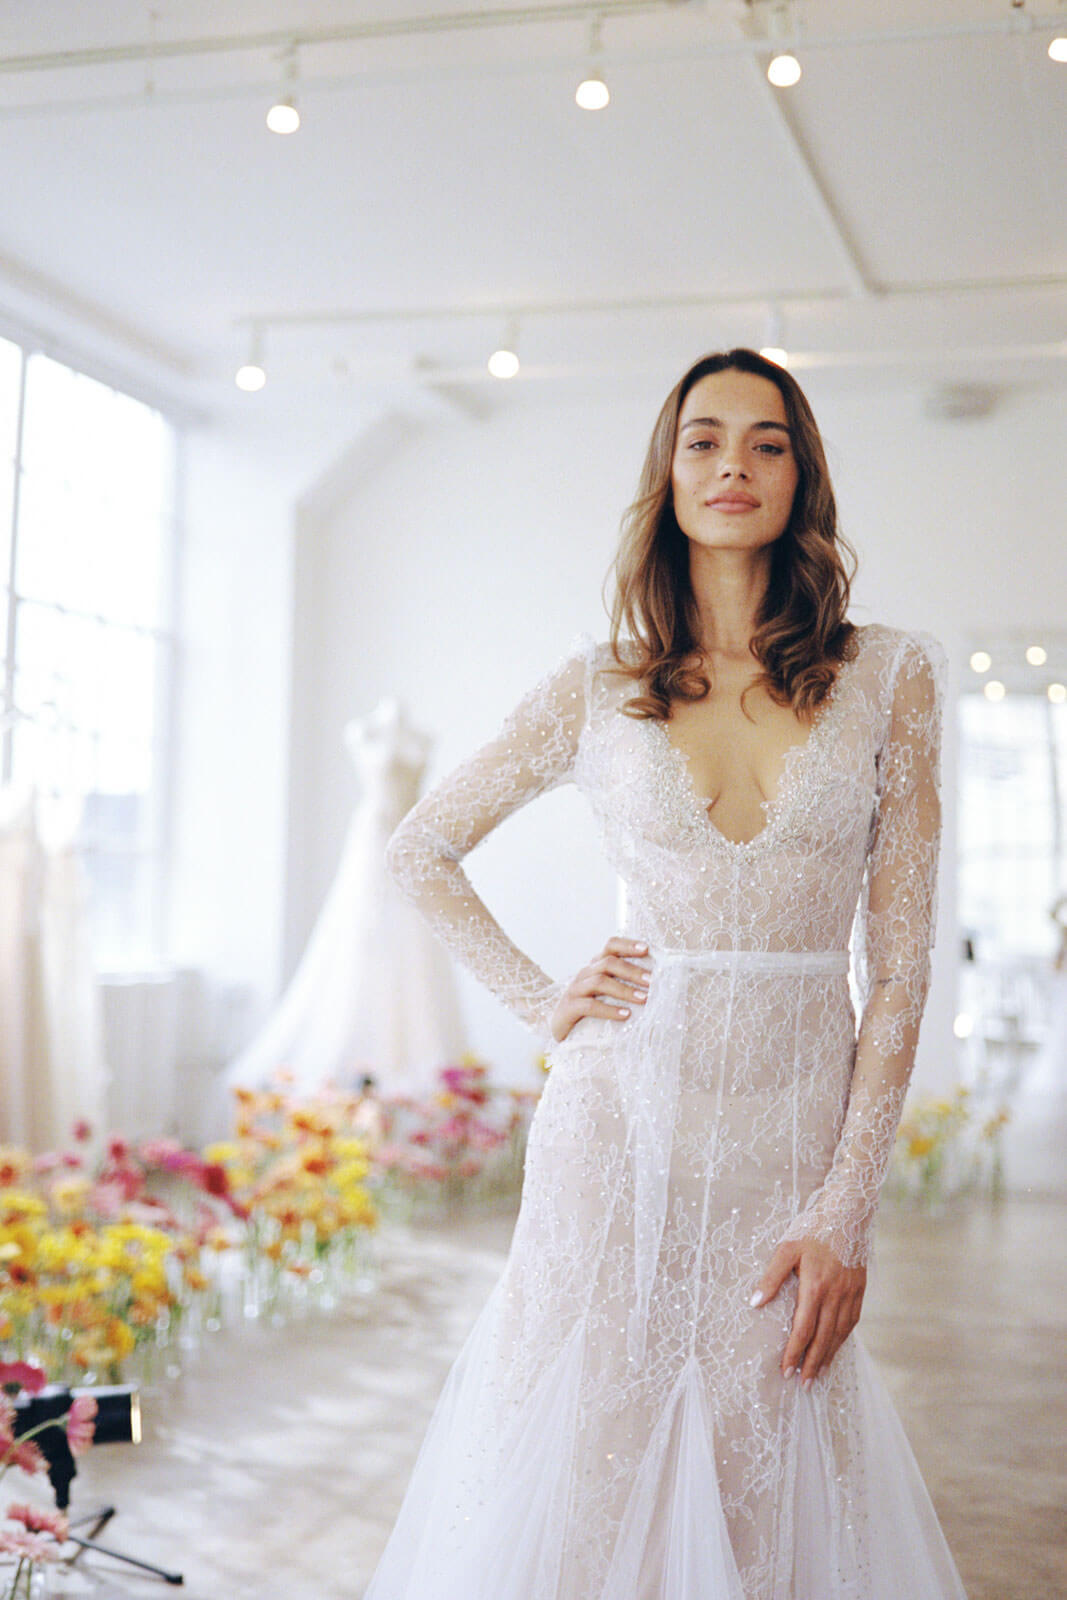 A model wearing a bridal gown in the New York Bridal Fashion Week. Image by Jenny Fu Studio